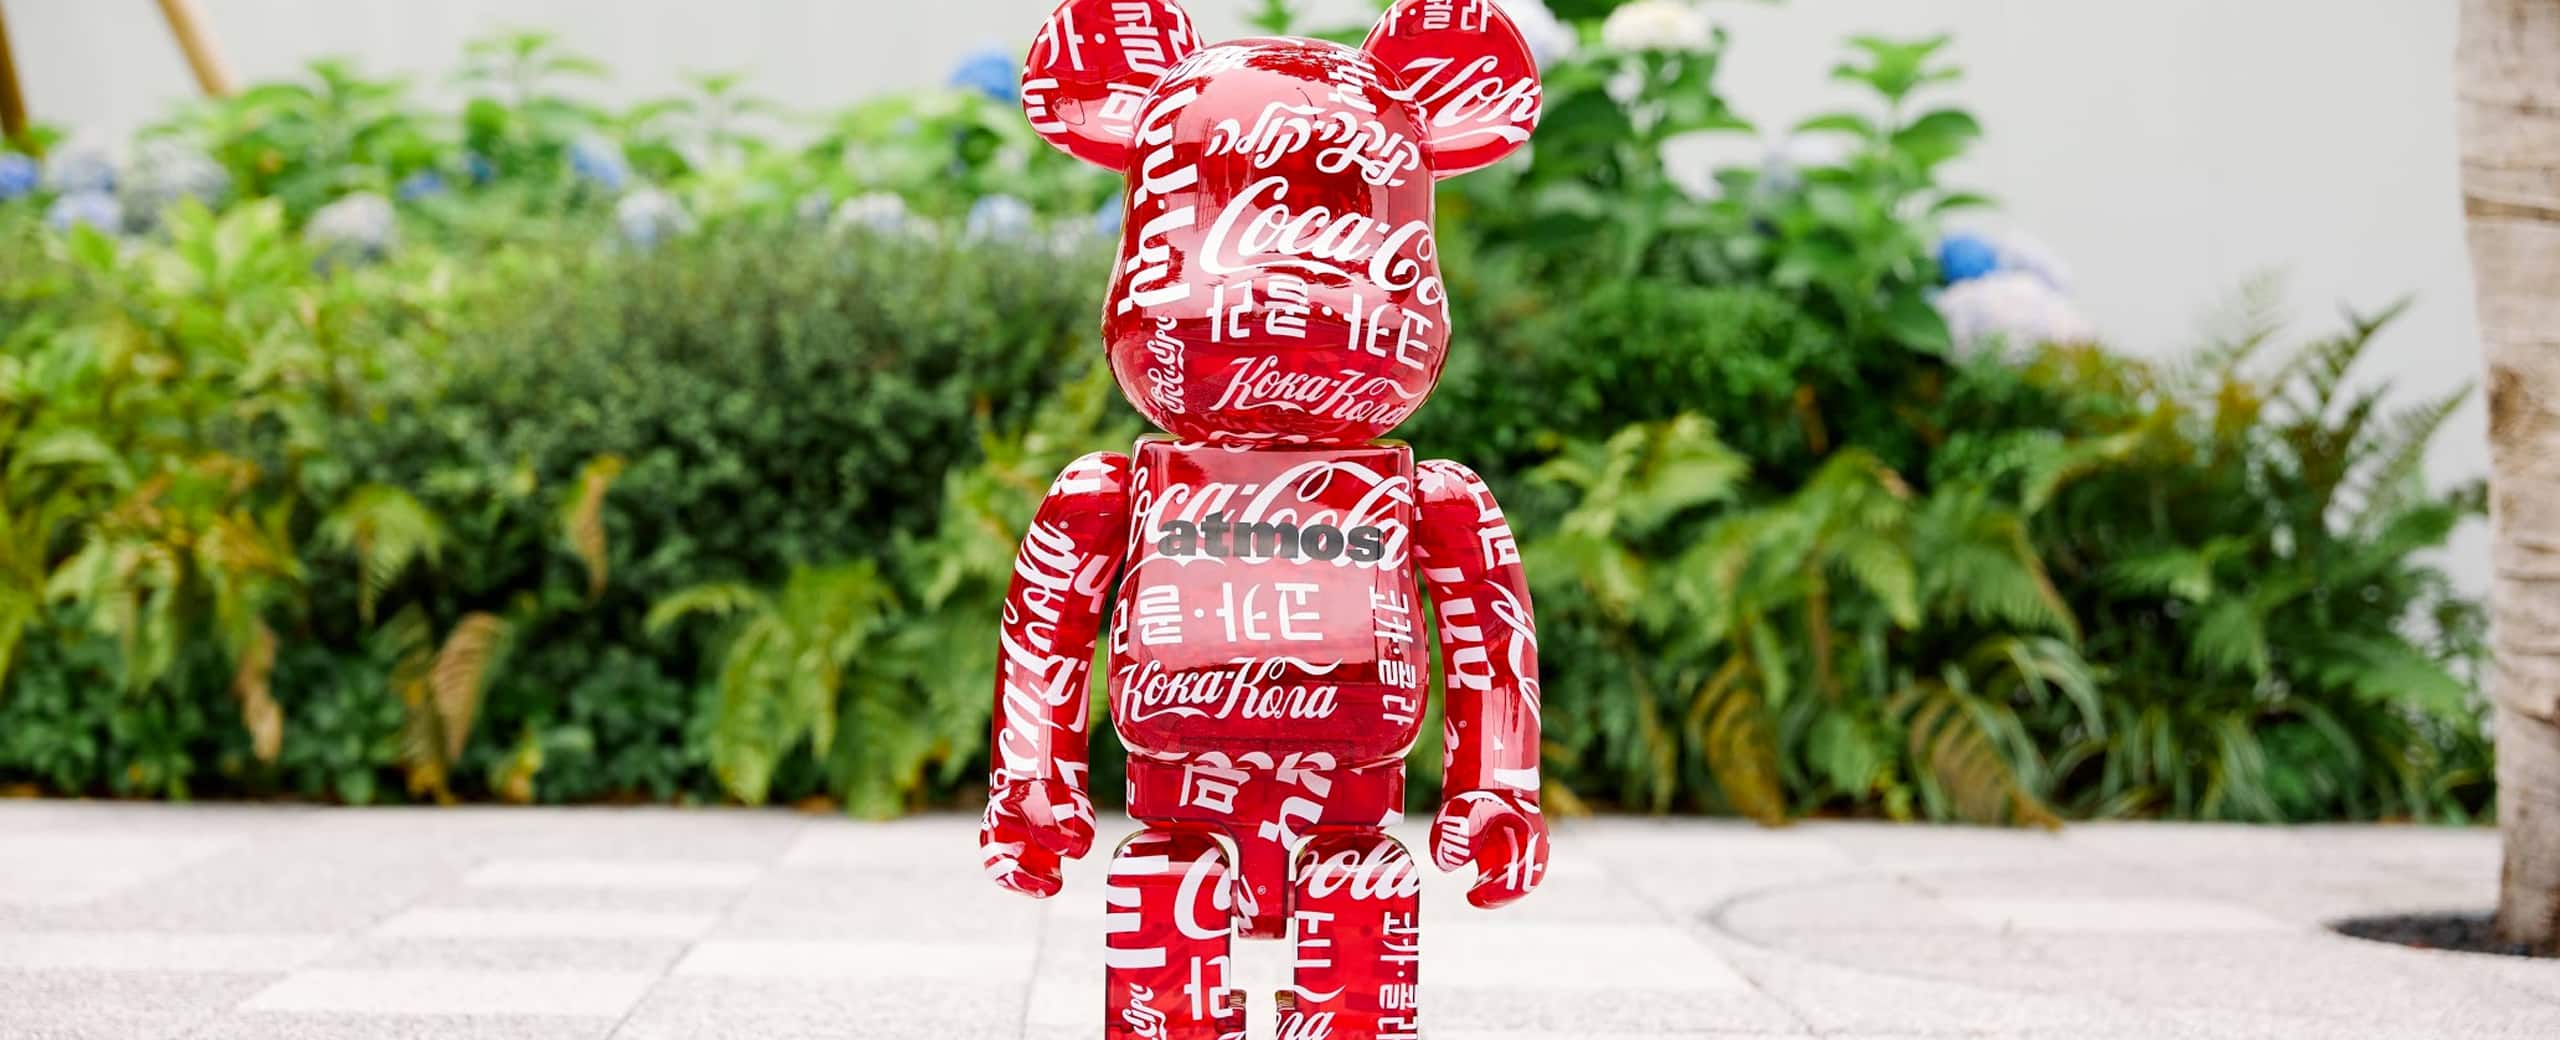 BE@RBRICK atmos × Coca-Cola 1000％ CLEAR